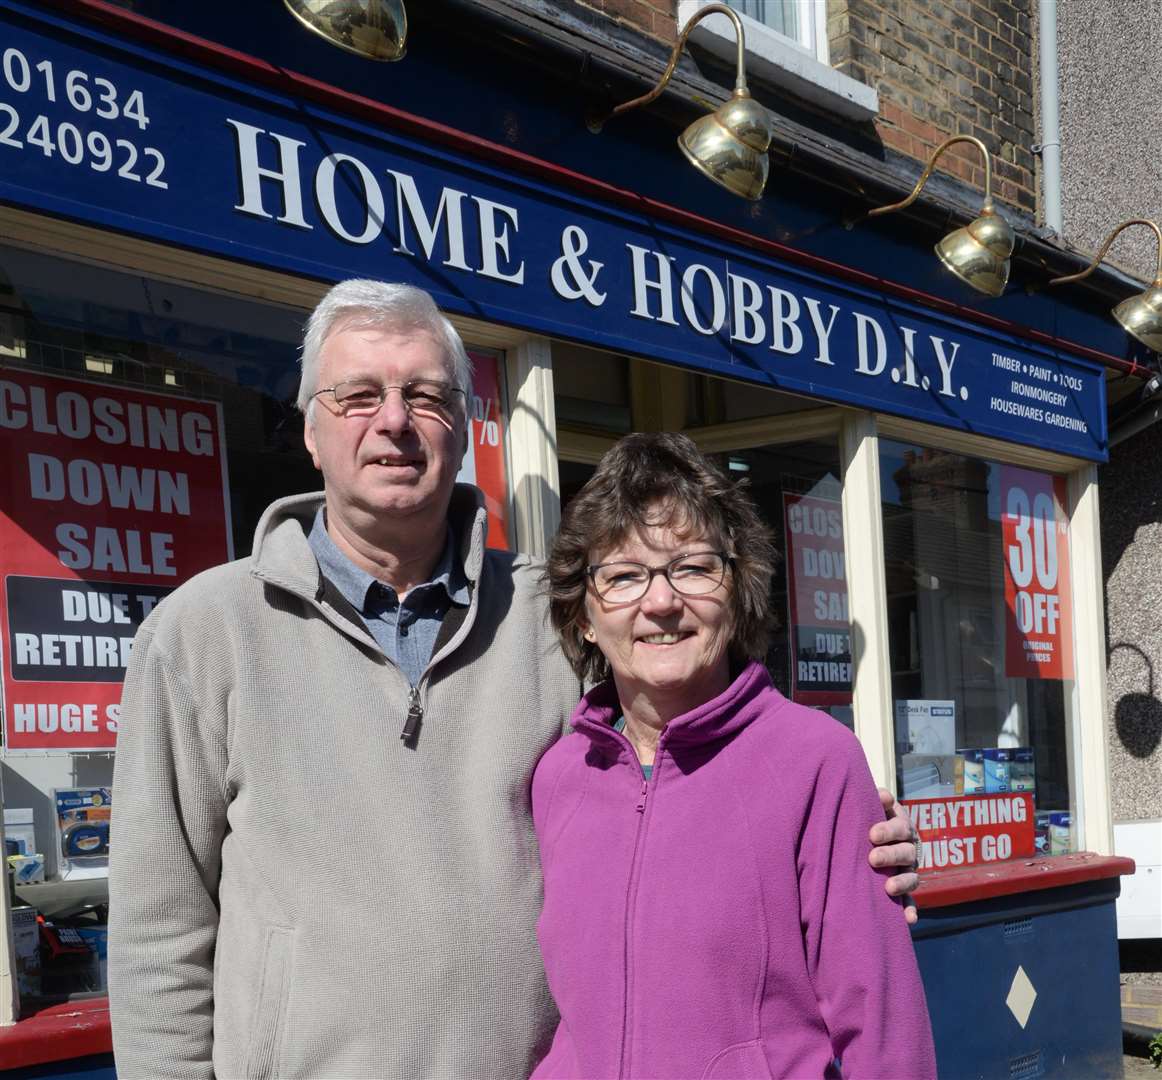 Alan and Penny Totham who are retiring from the Home and Hobby DIY shop in Snodland